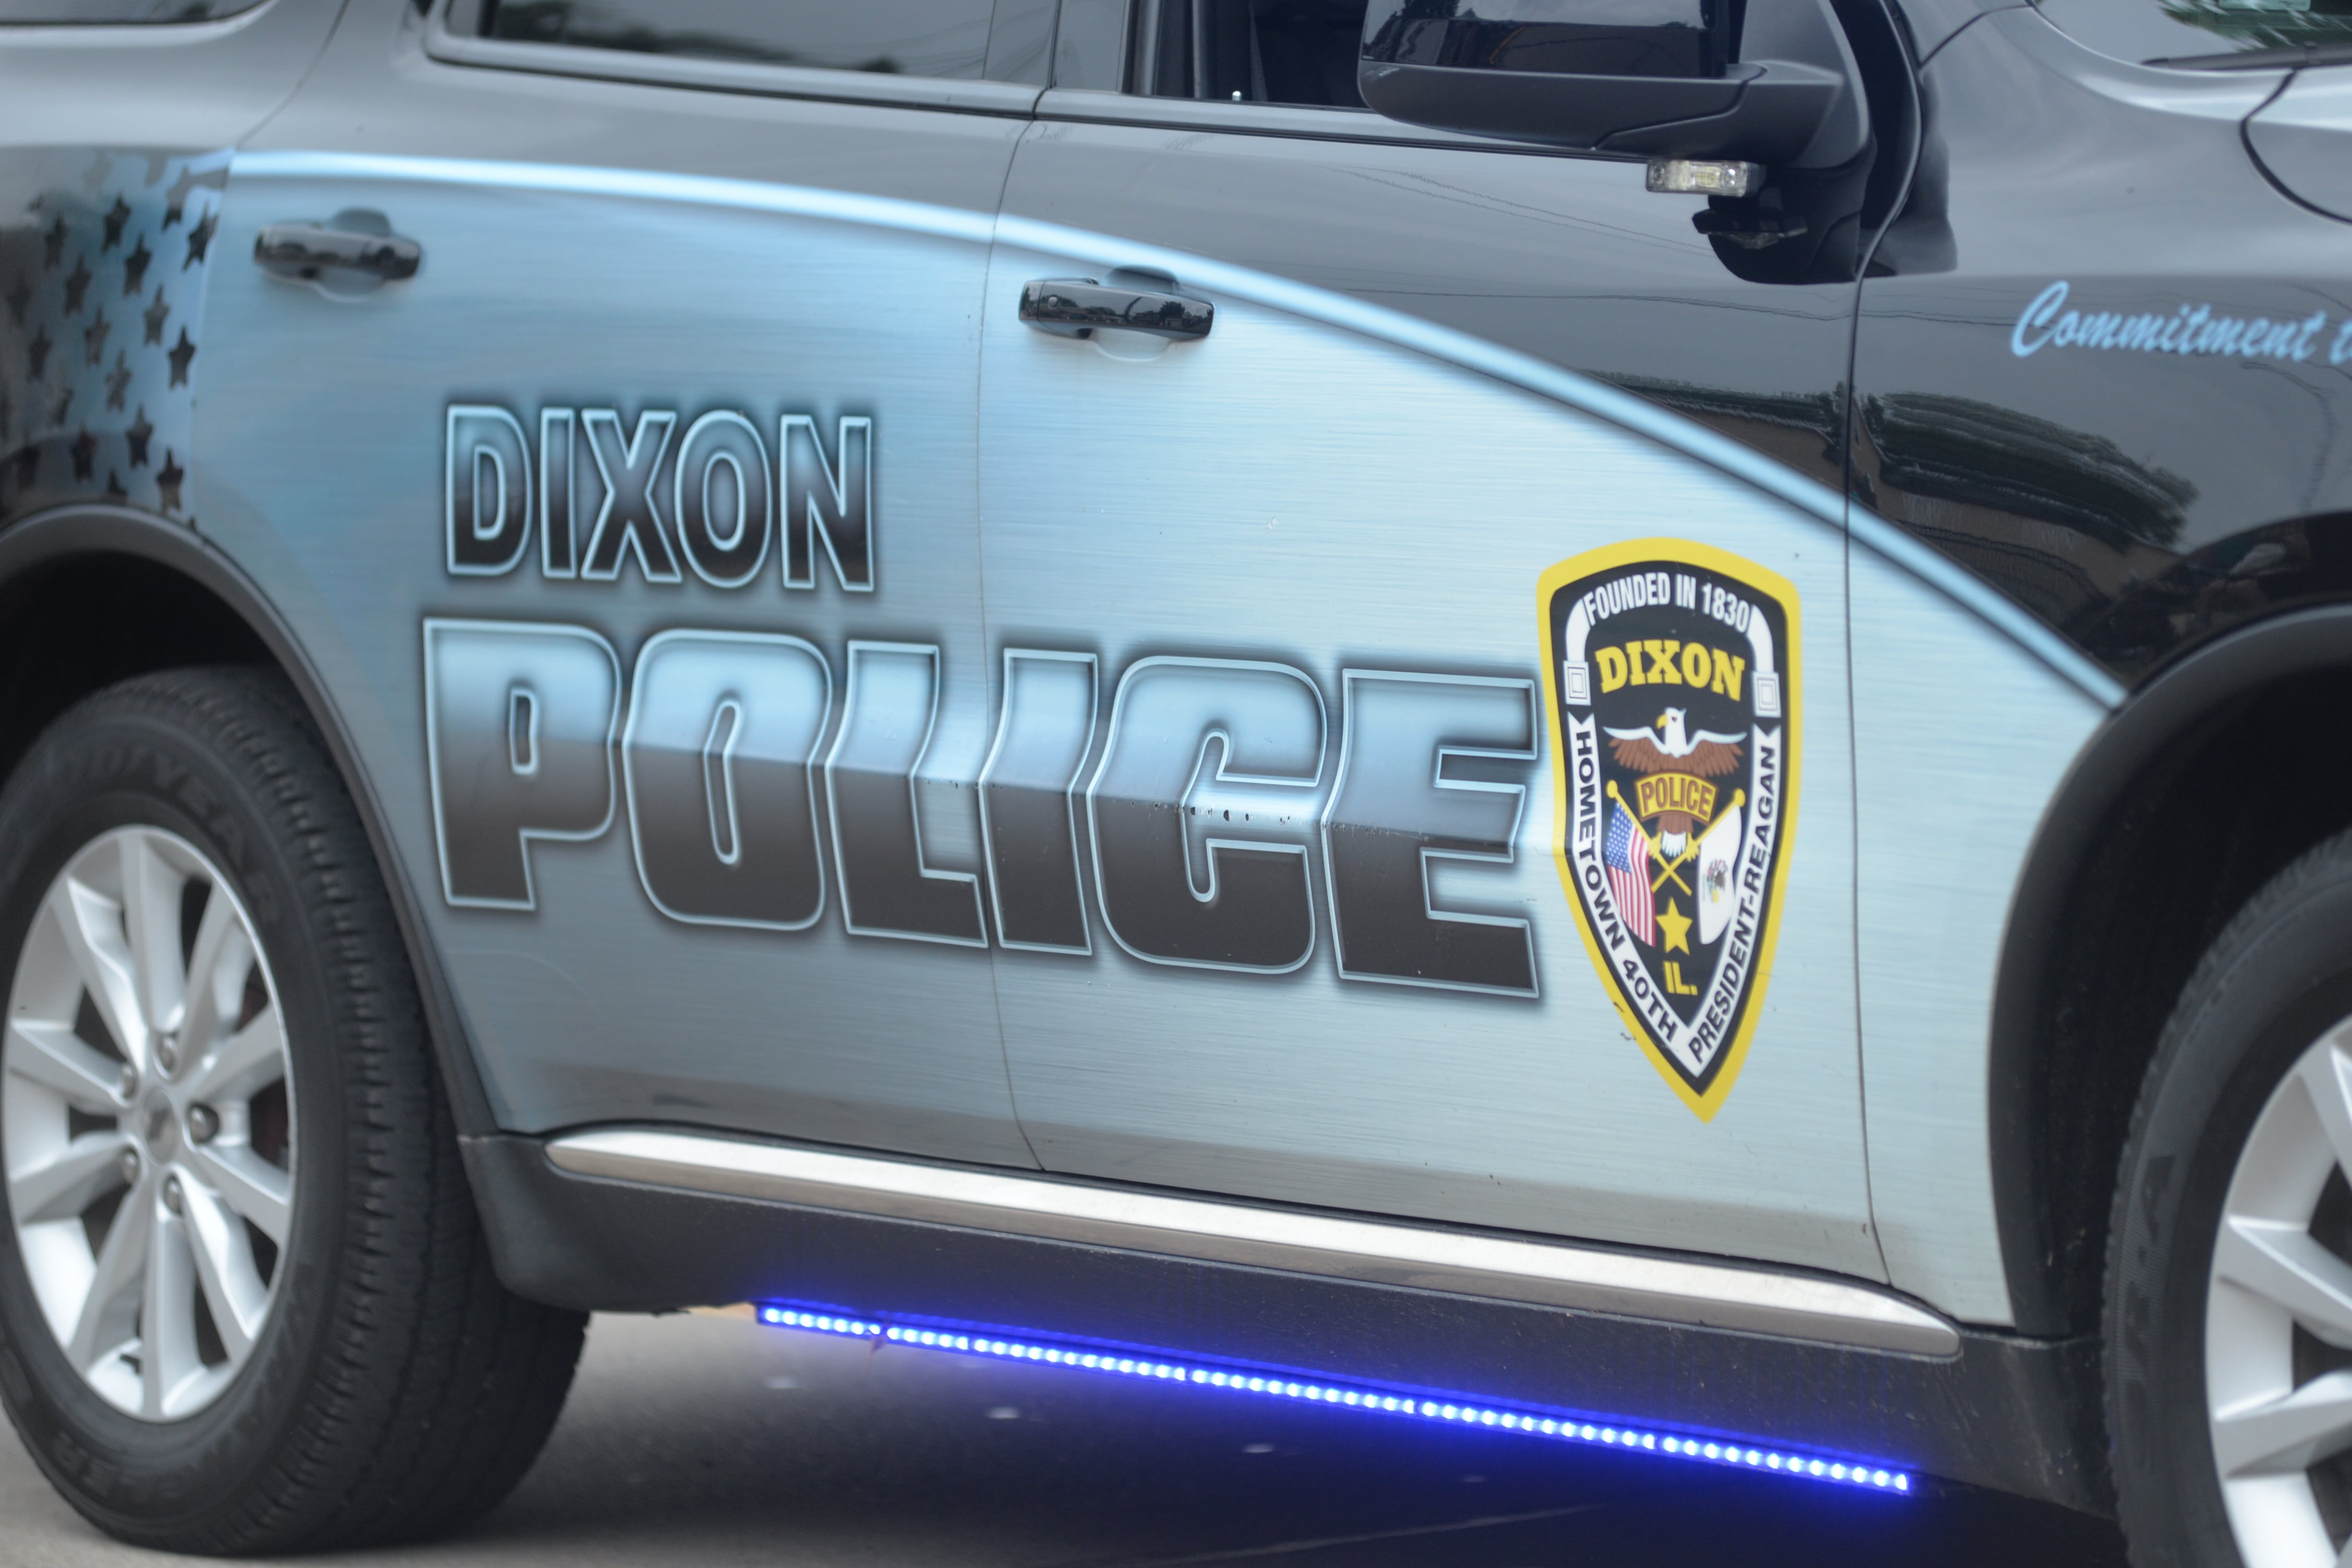 National Night Out is Aug. 6 in Dixon